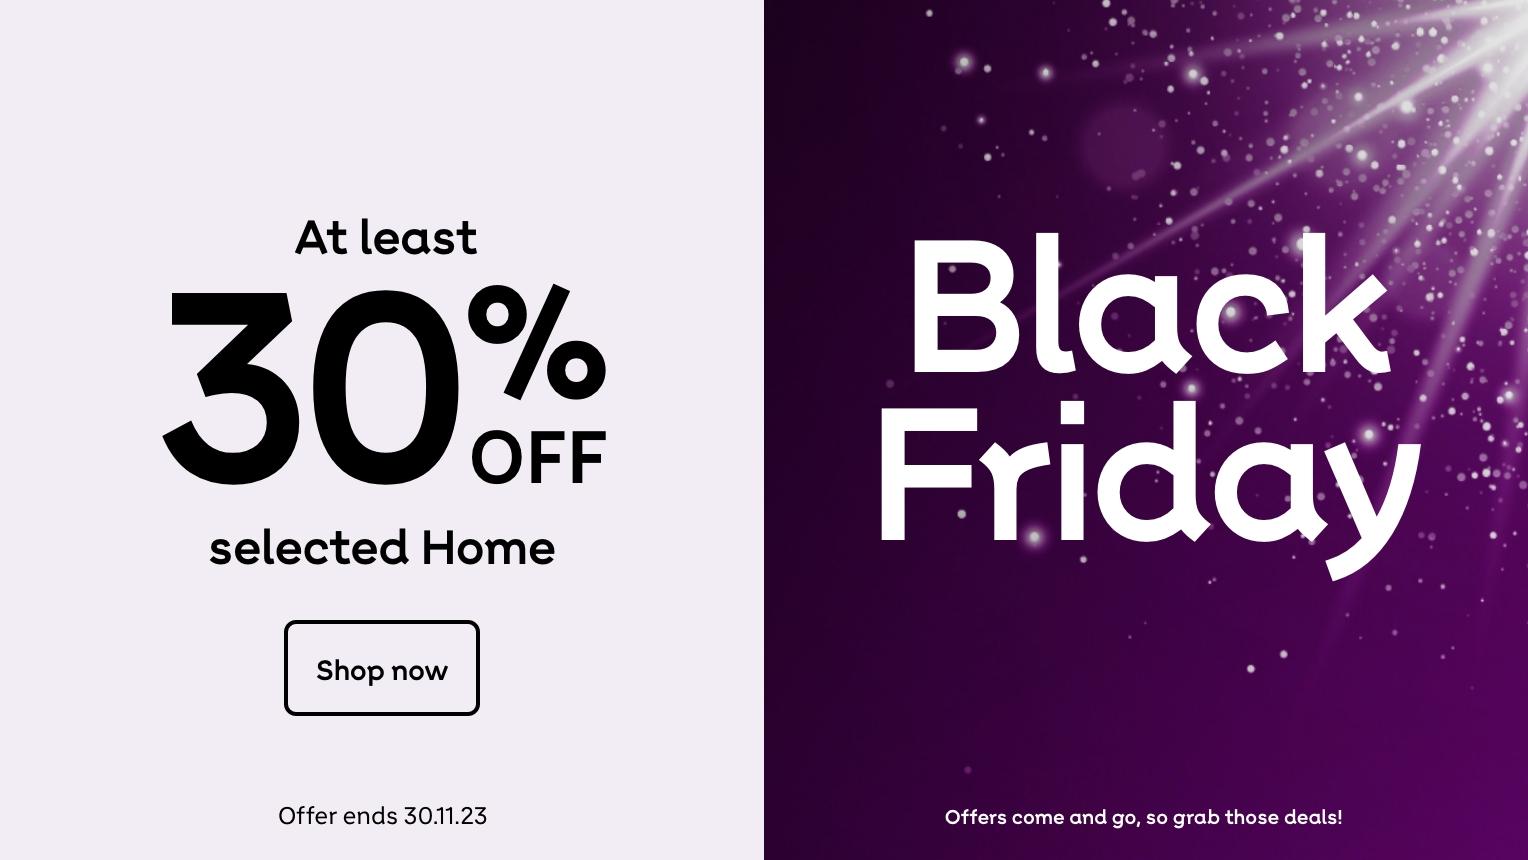 At least 30% off selected Home & Furniture. Shop now. Offer ends 23:59 30.11.23